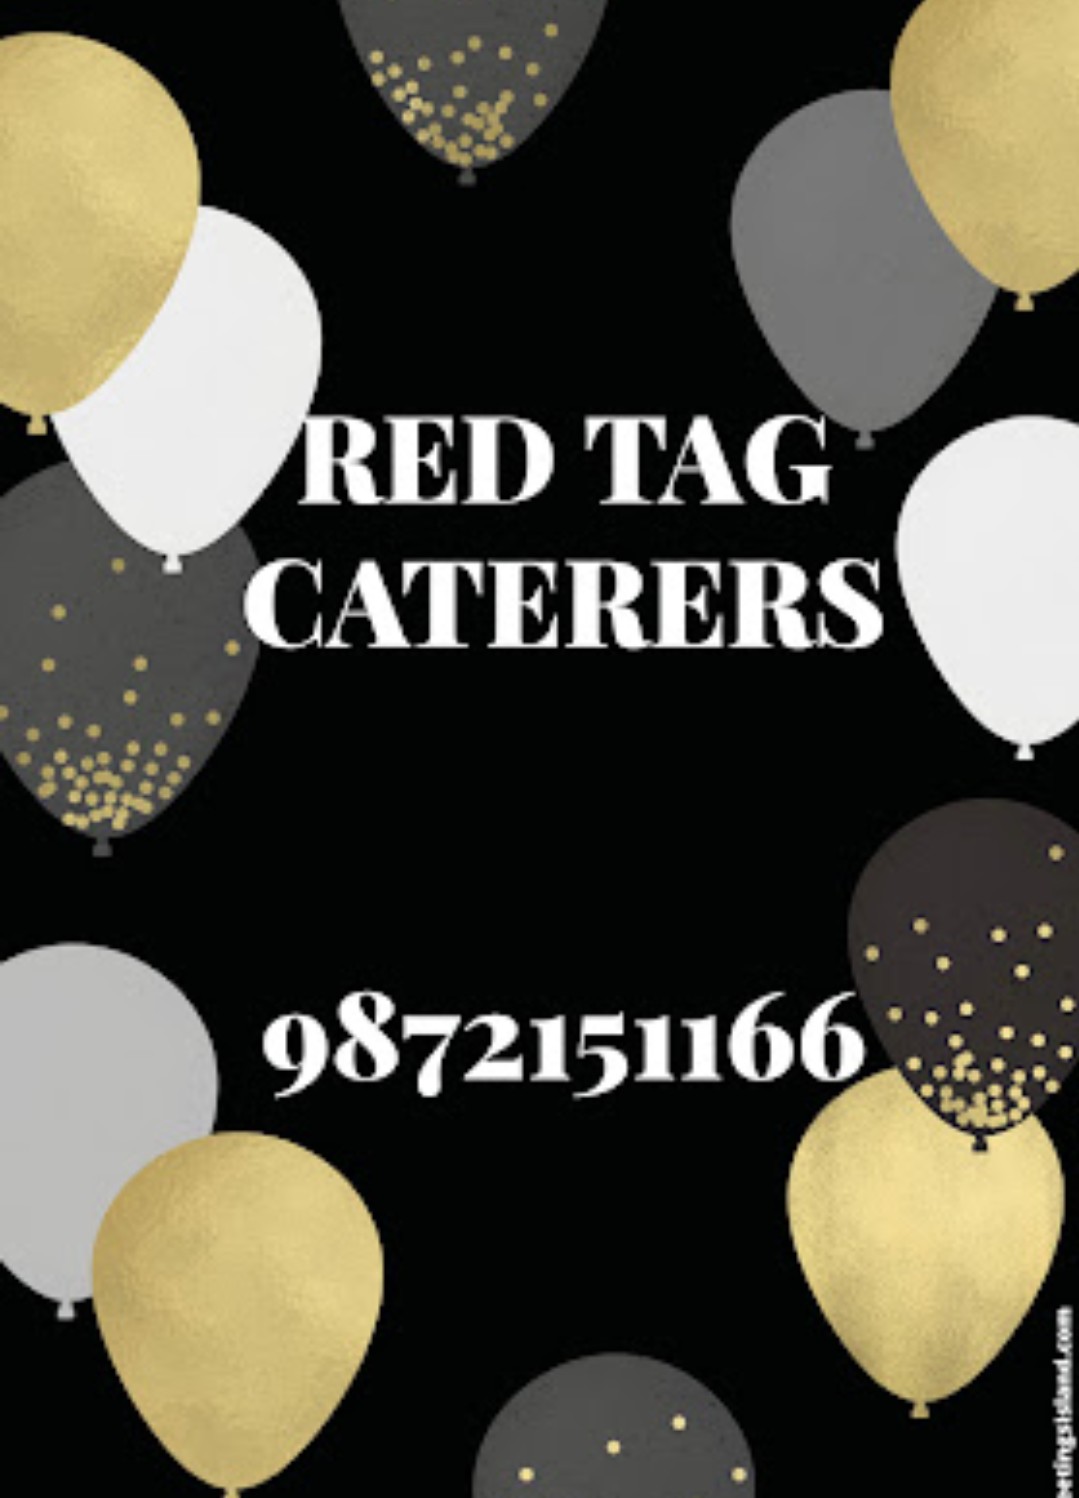 Food catering service in Mohali  | Red Tag Caterers | Best caterers in Mohali, quality food catering service in Mohali, vegetarians catering service in Mohali, Top 10 caterers in Mohali,  - GL66447